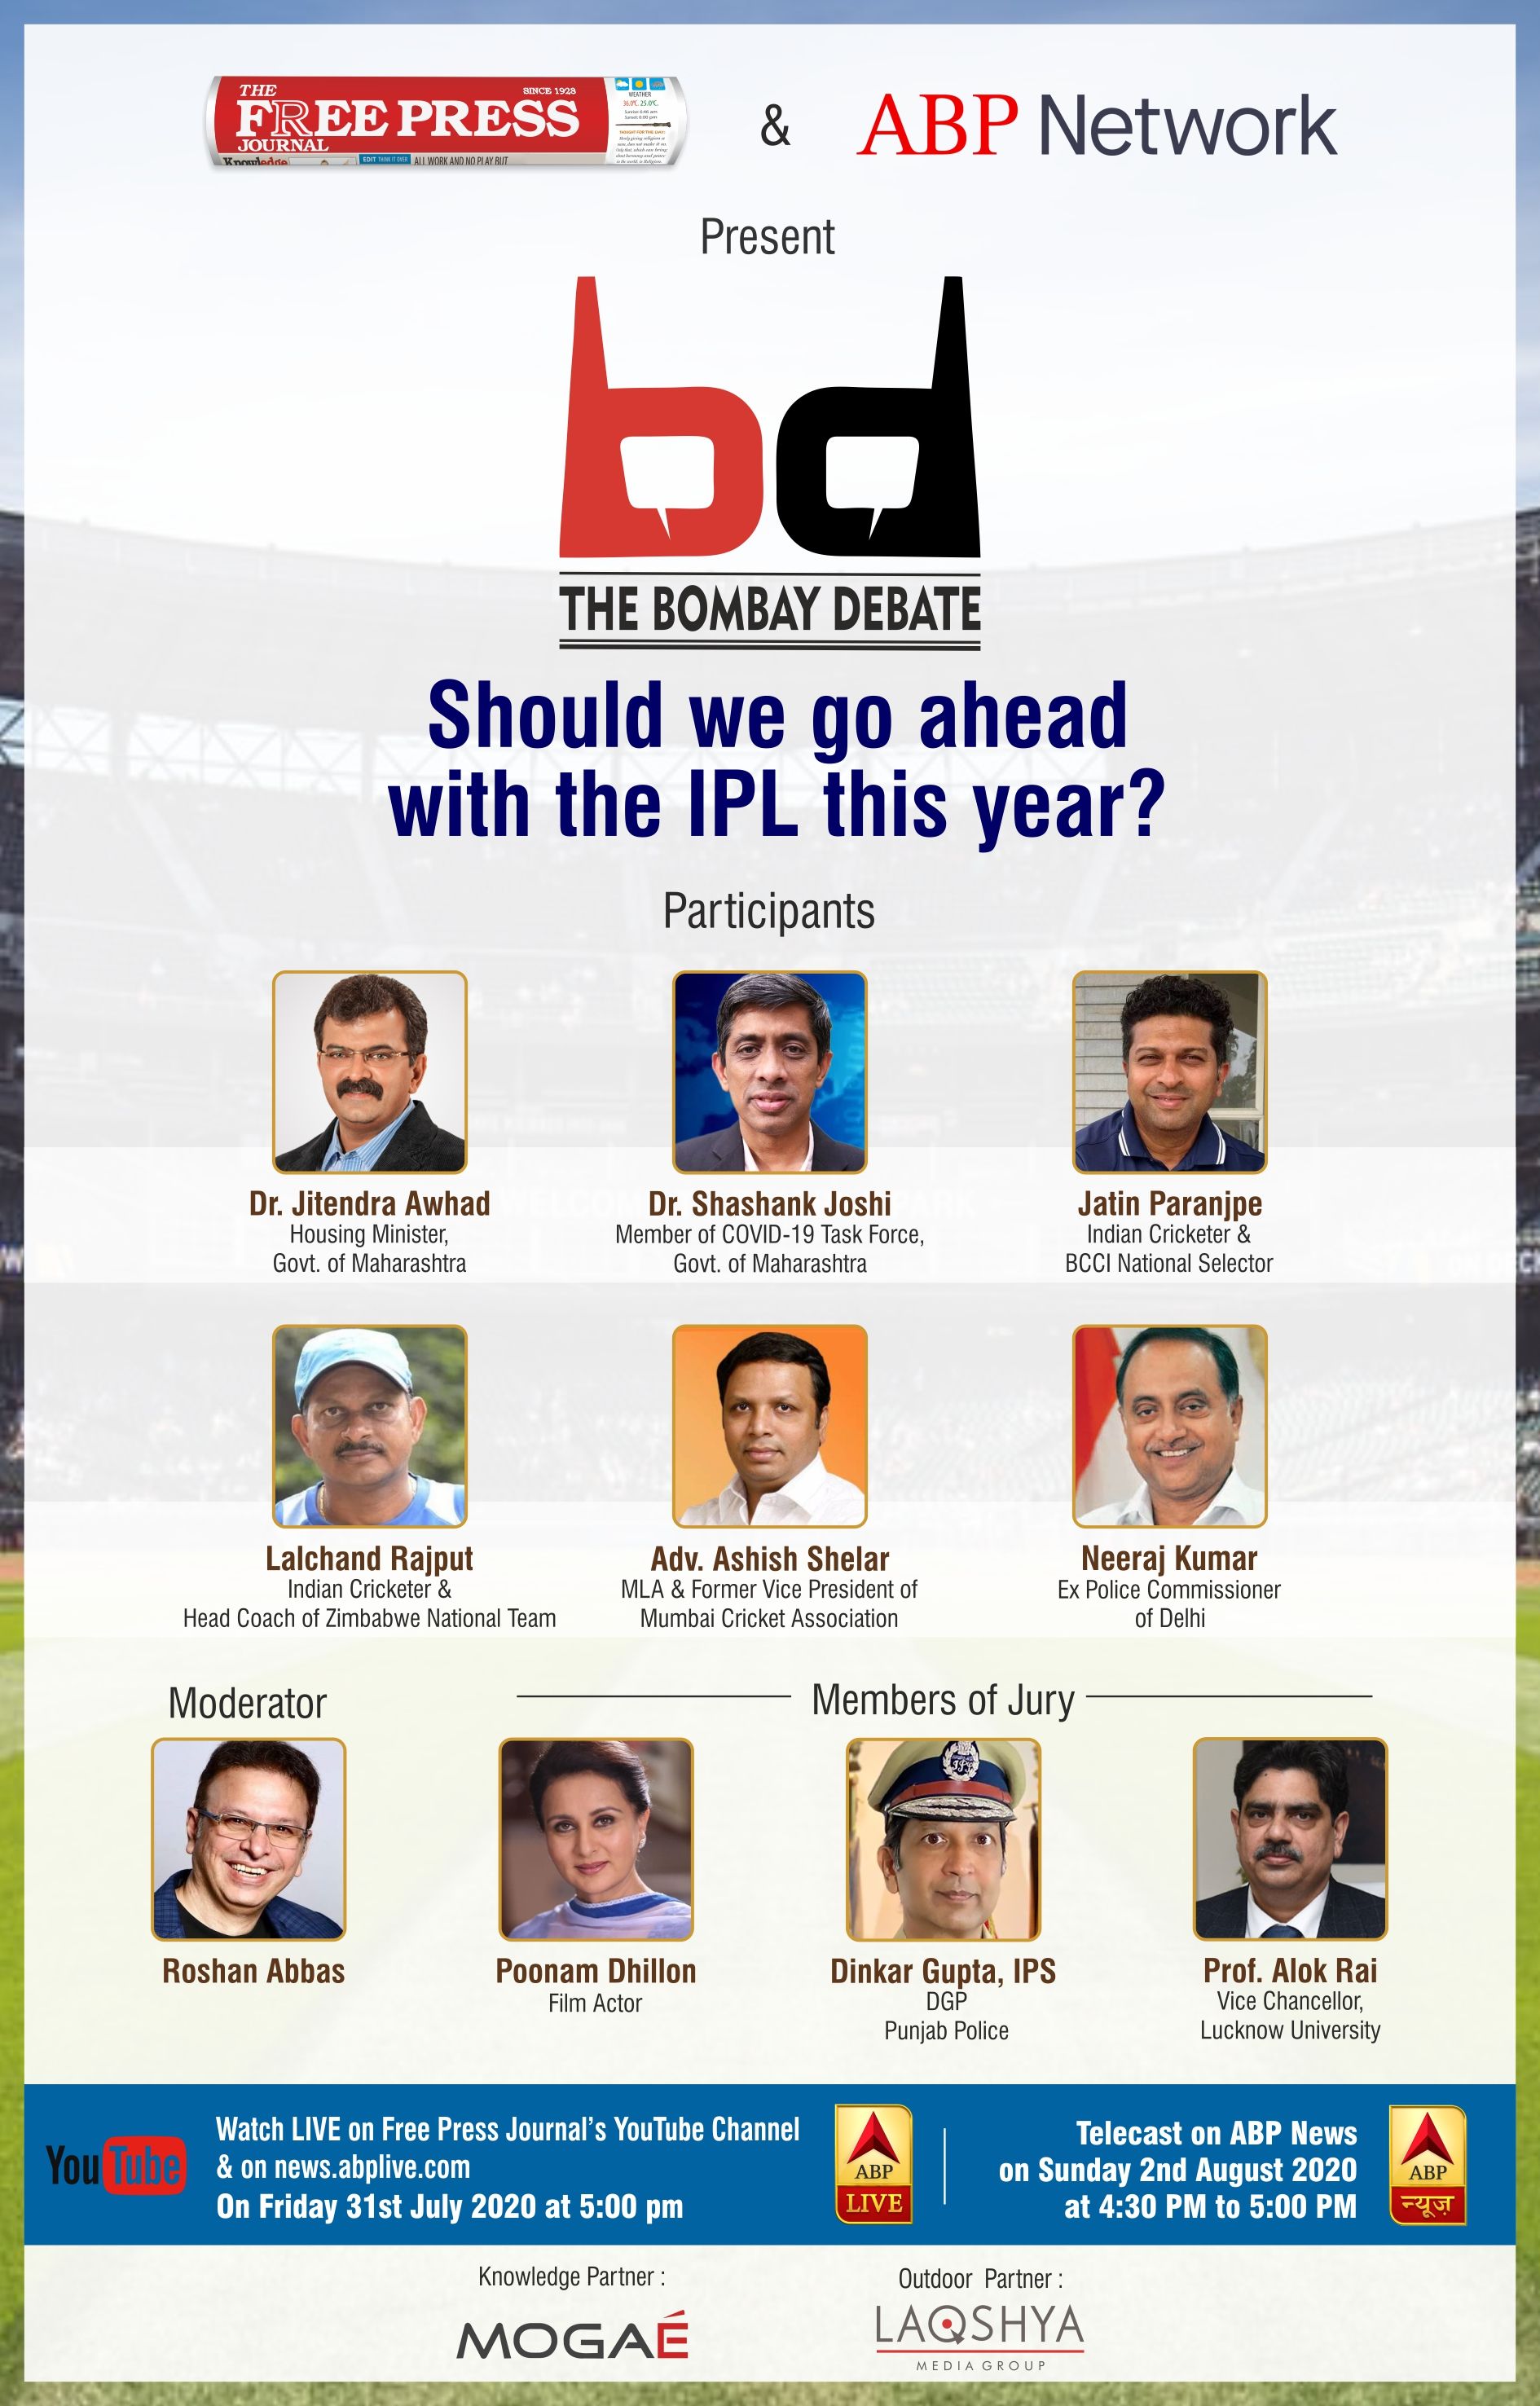 The Free Press Journal & ABP Network Present The Bombay Debate | Should We Go Ahead With The IPL This Year?